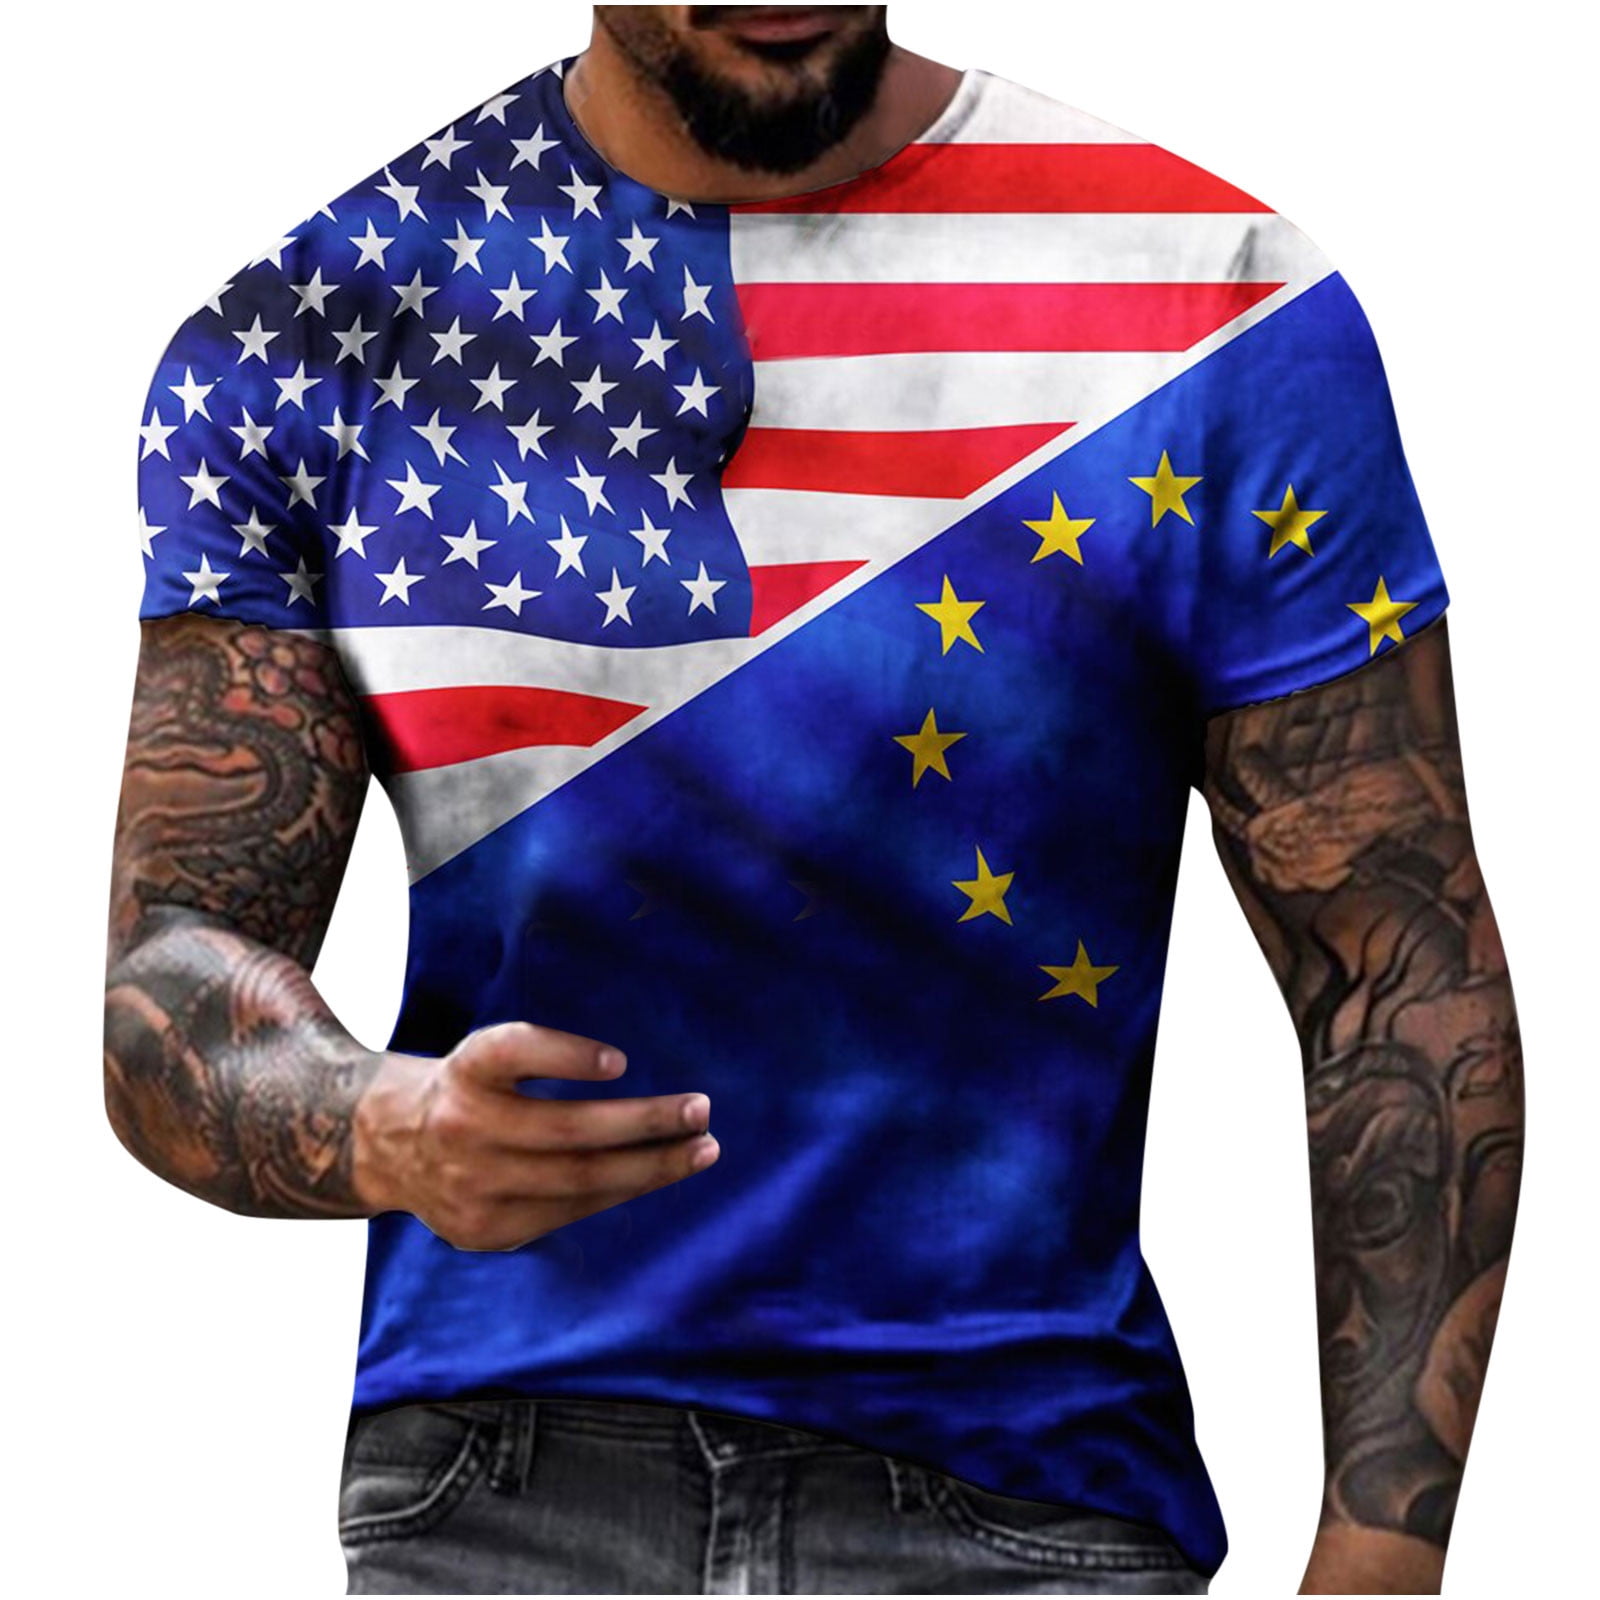 Mens T Shirts Casual,Soldier Short Sleeve for Men T-Shirt Retro Patriotic Blouse Muscle Workout Athletics Tee Tops 